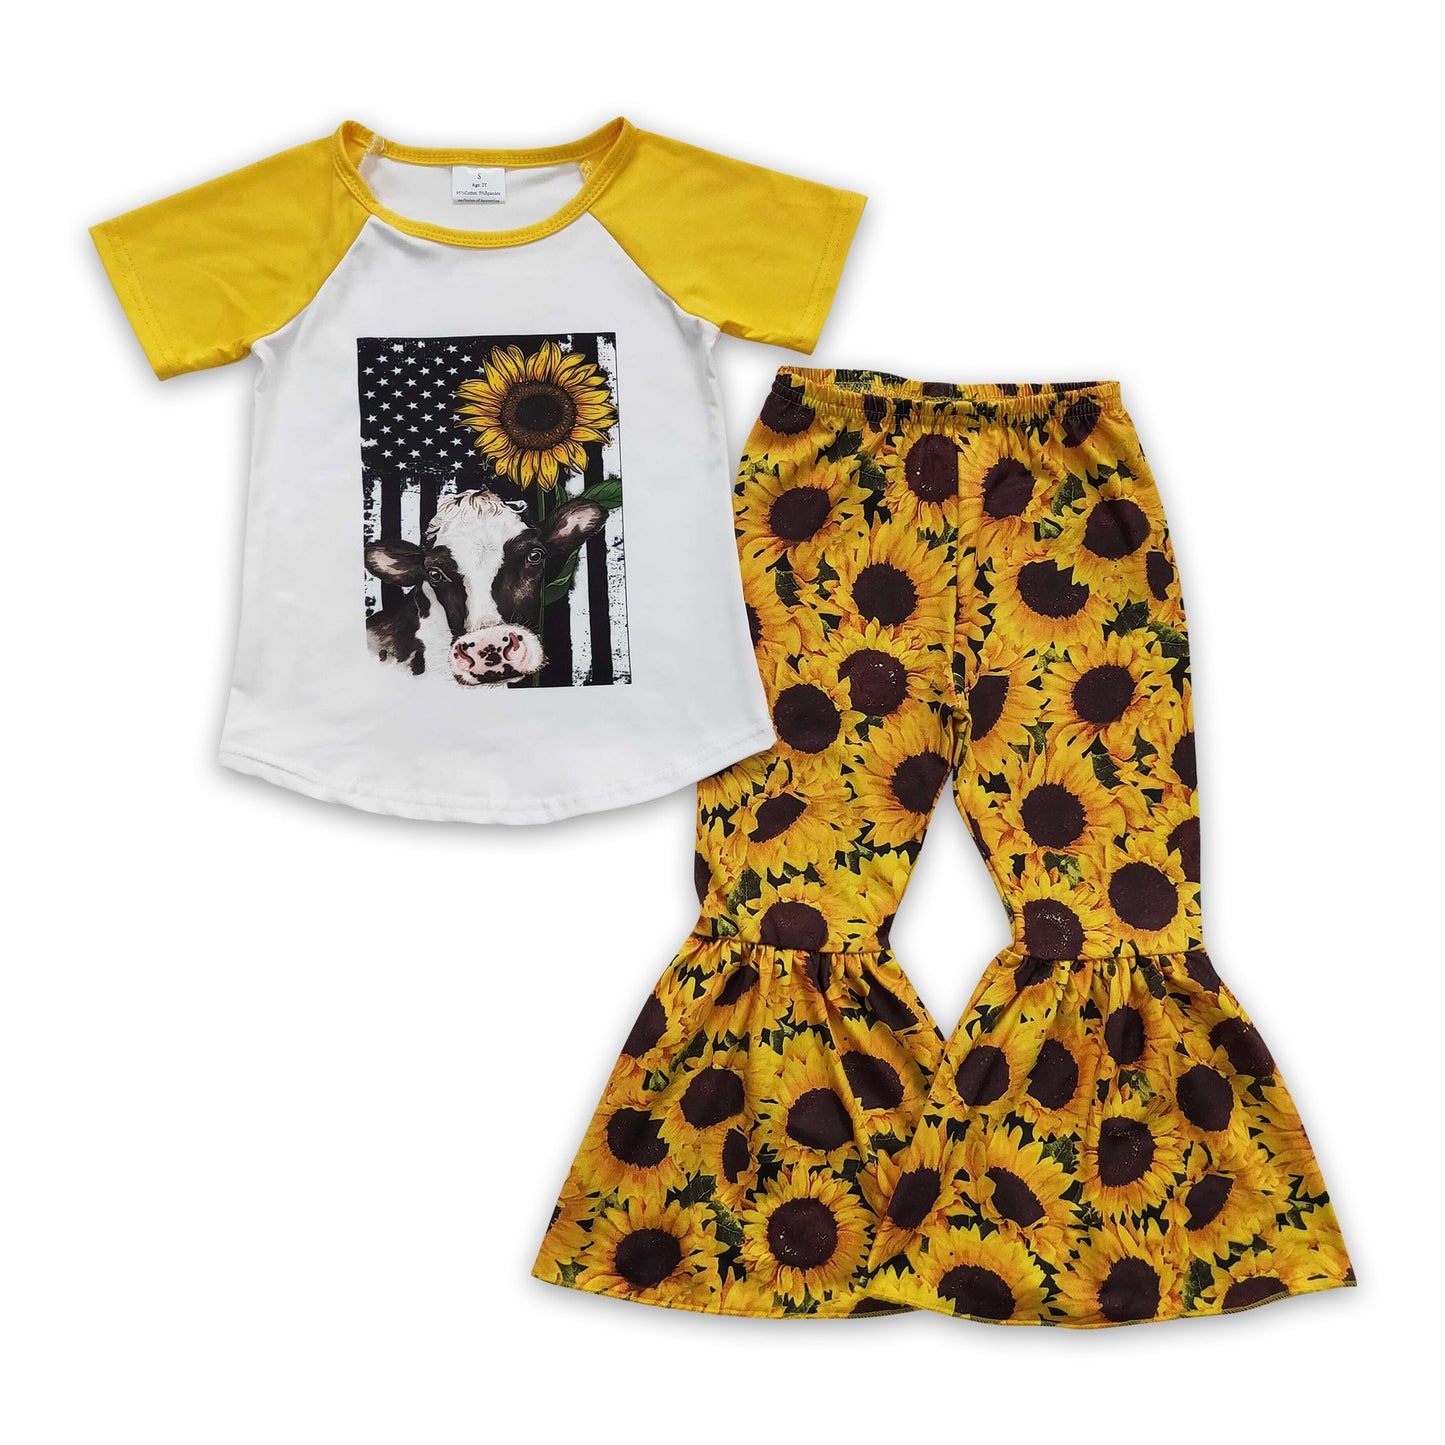 Cow Head Sunflowers Outfit